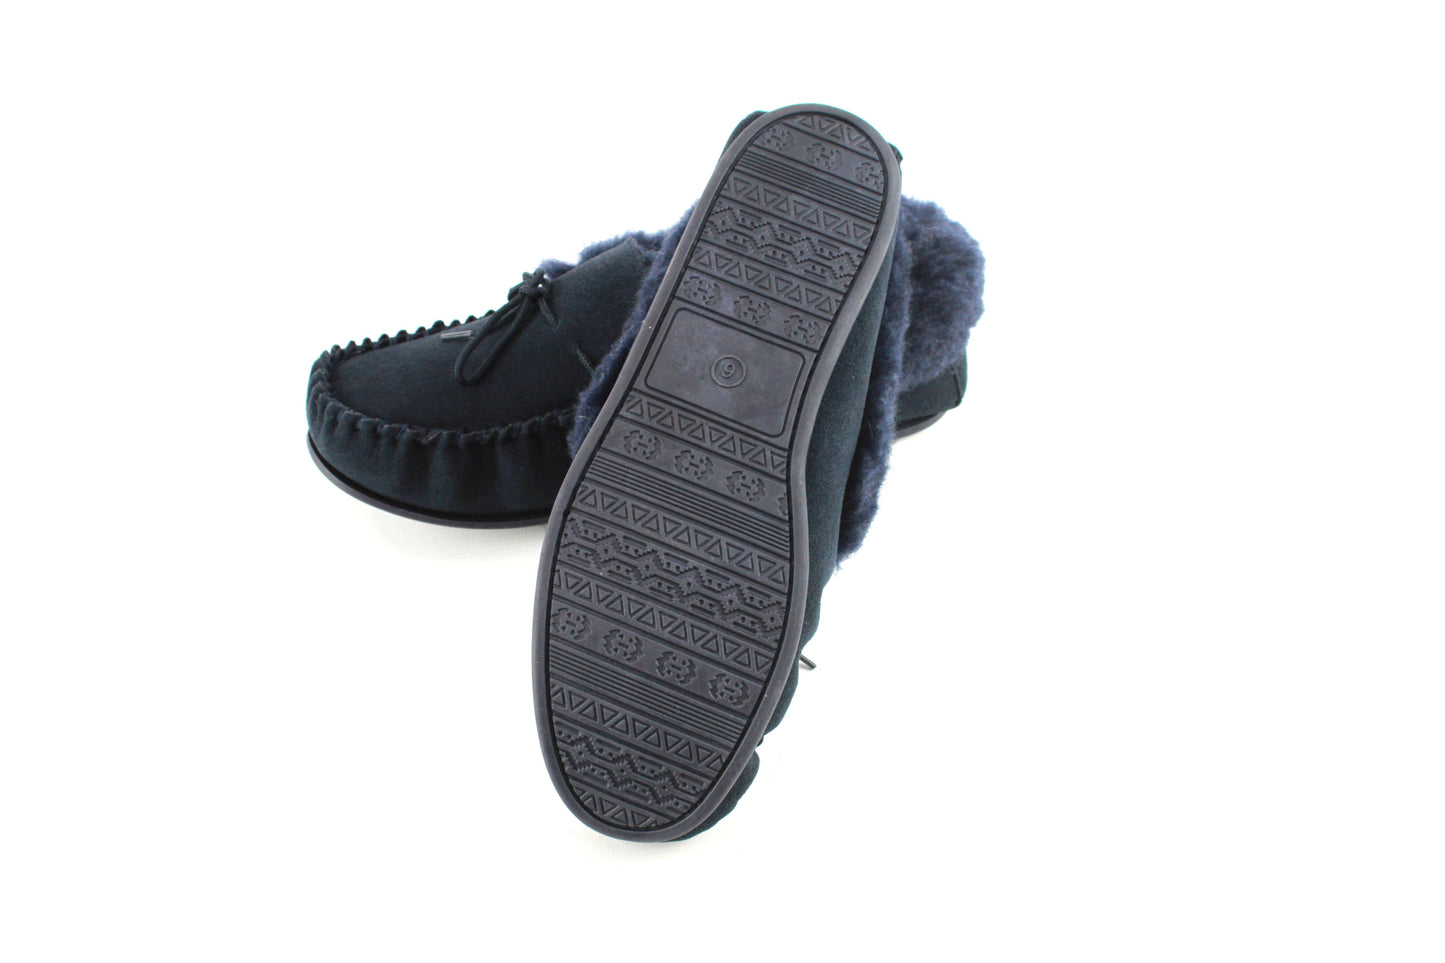 Navy Willow Moccasin slippers